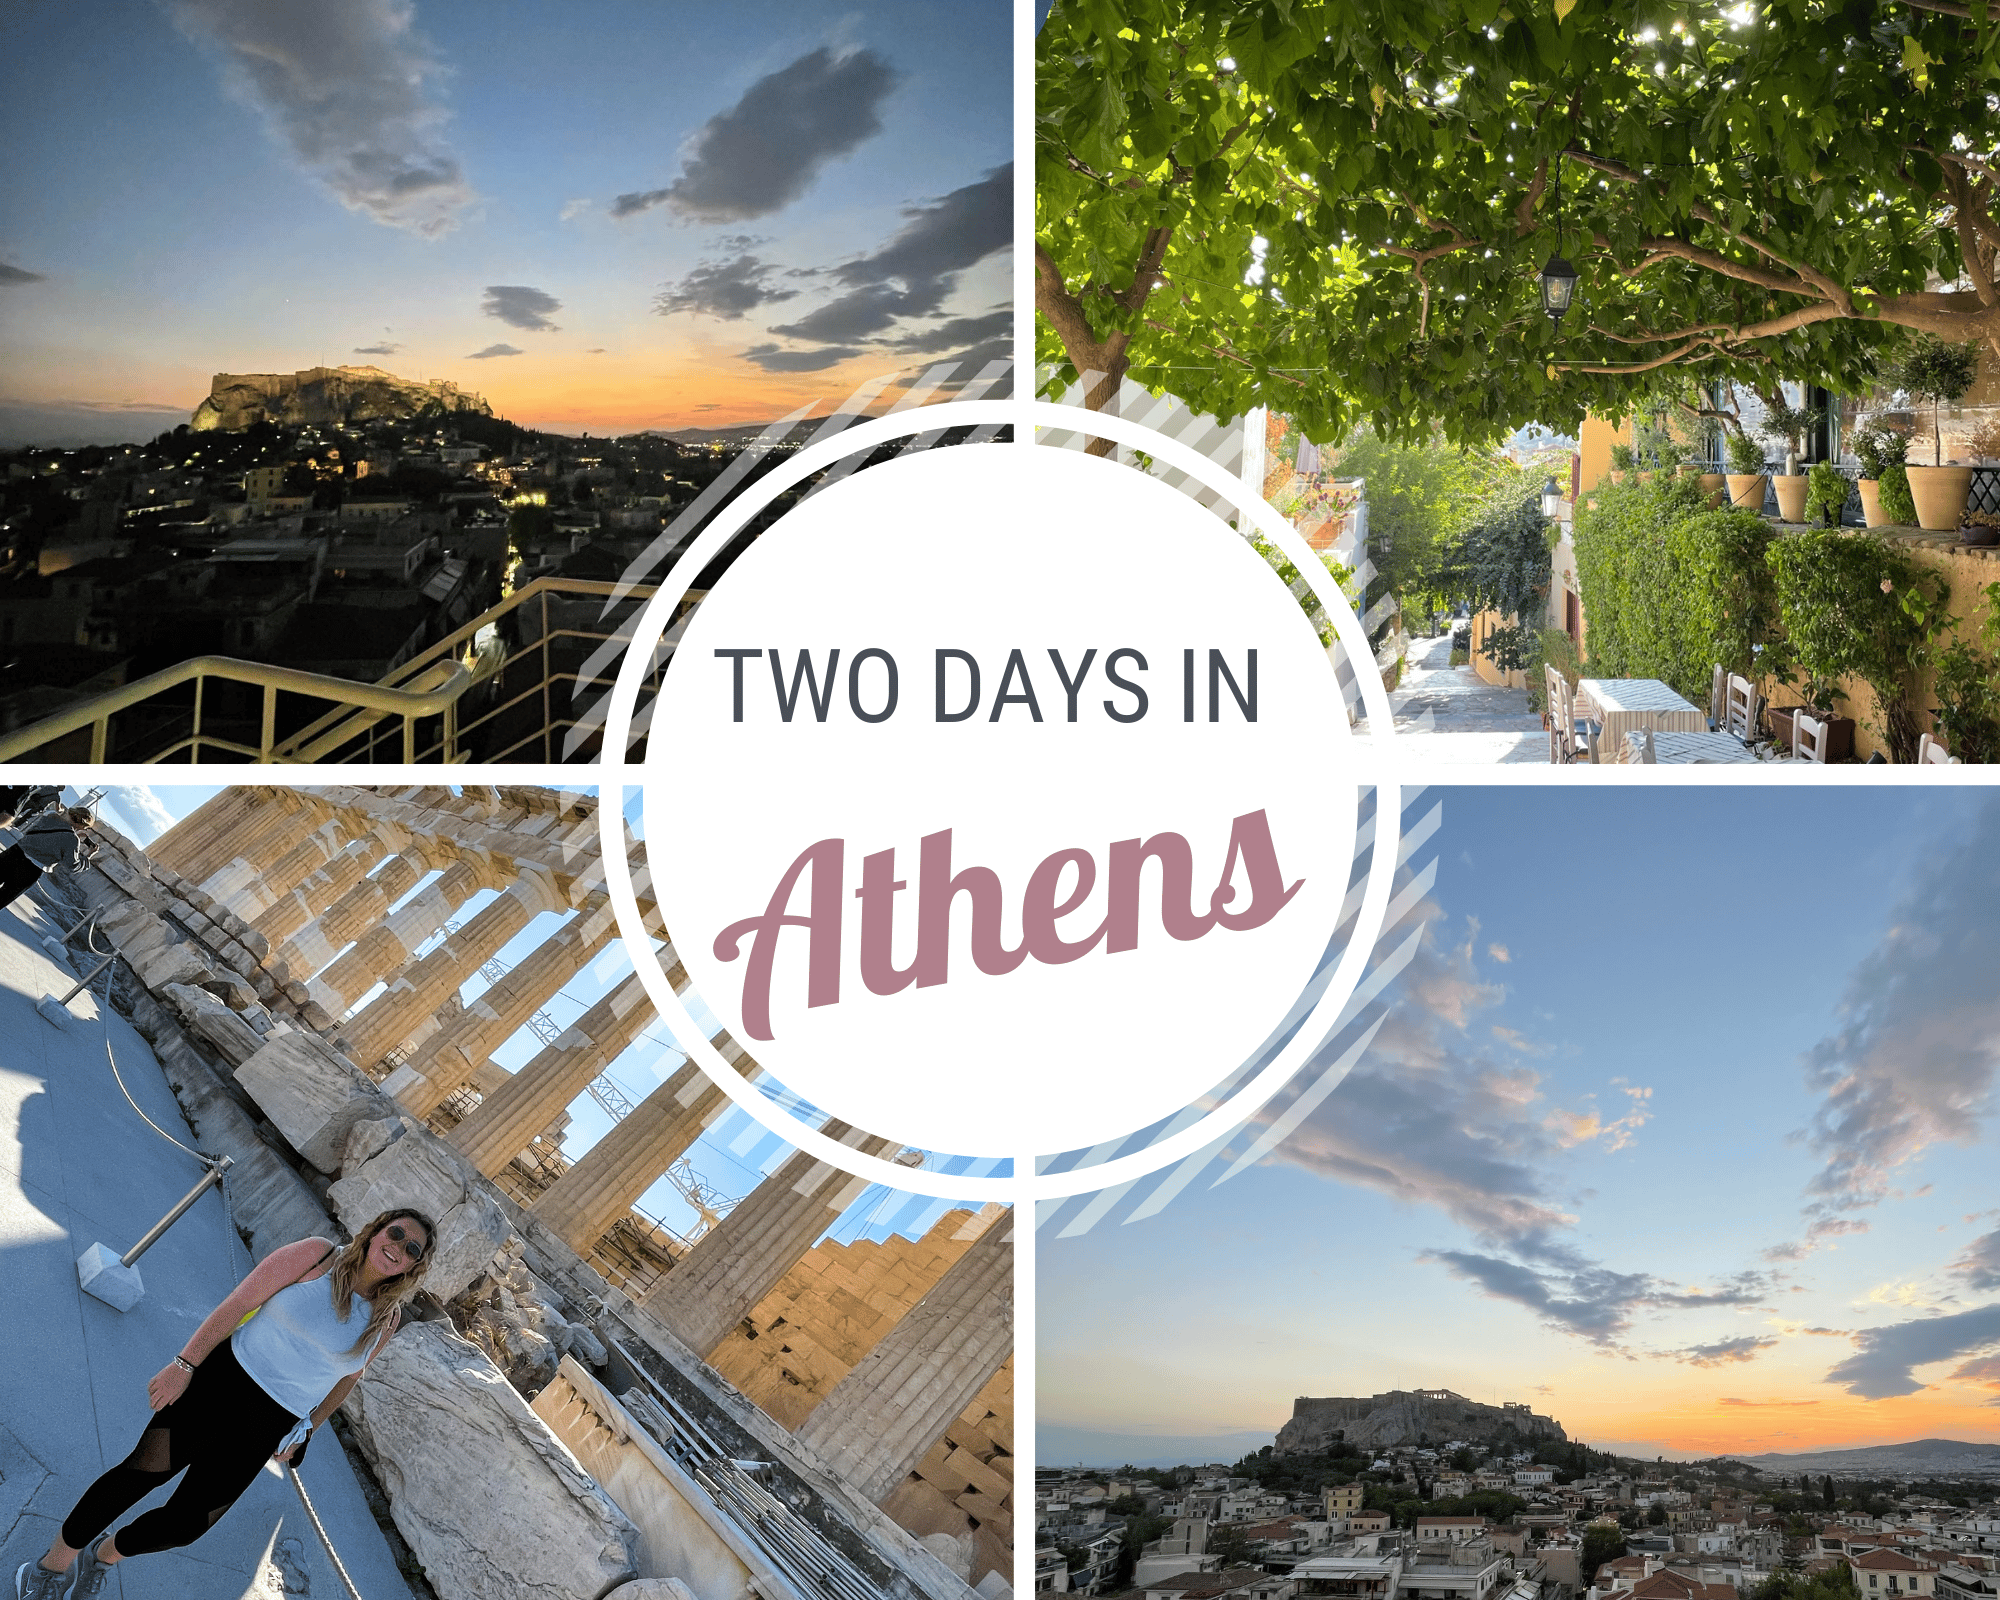 2 days in athens